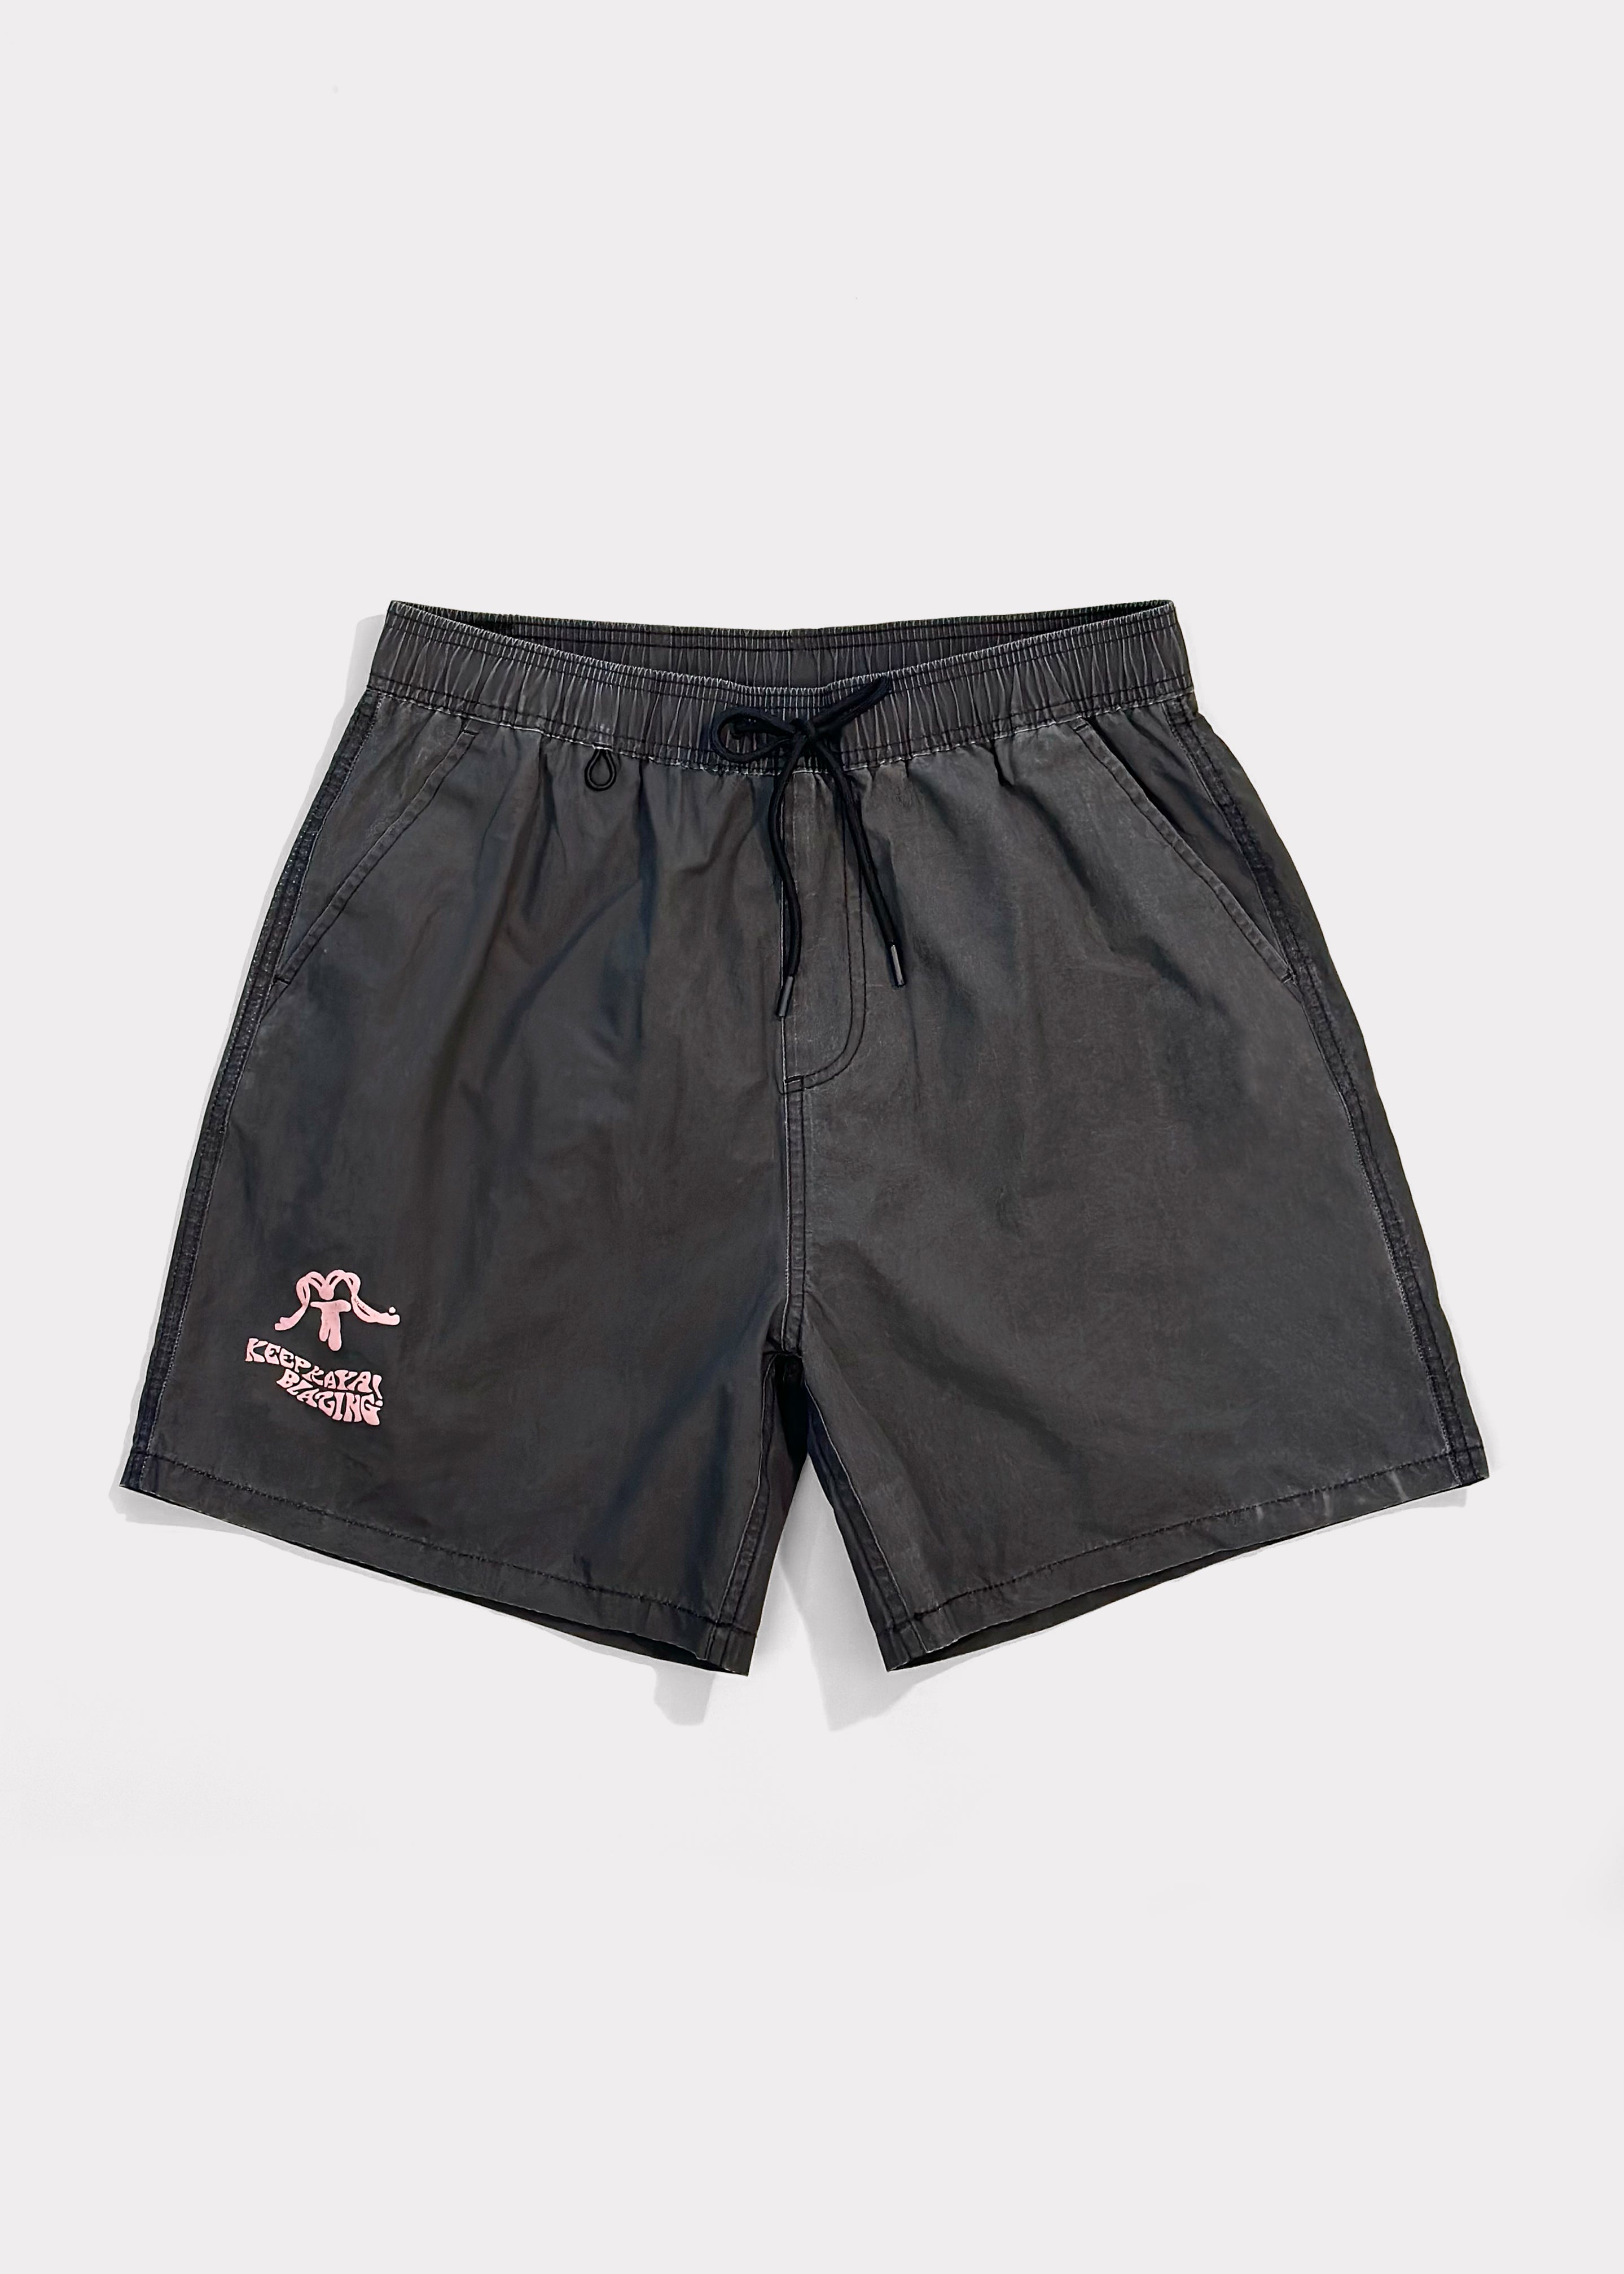 Volley Classic Black